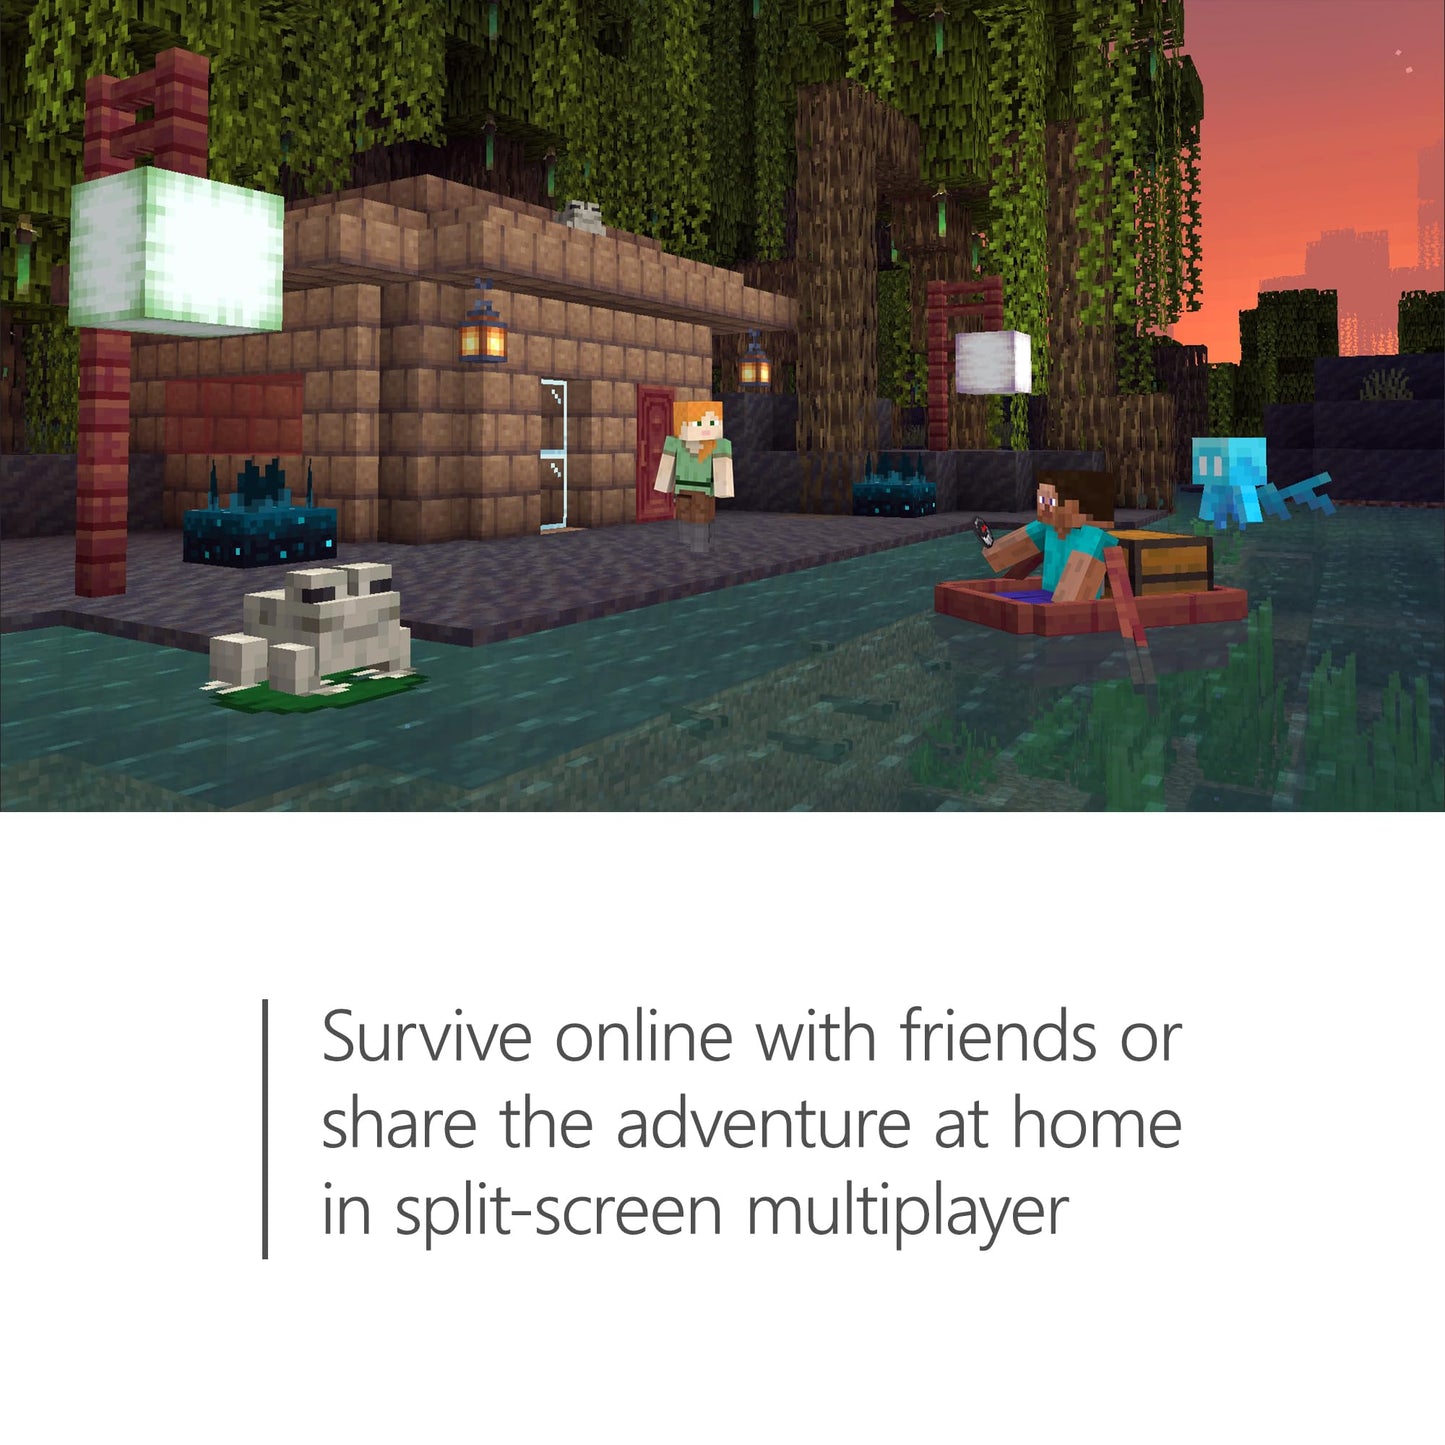 Minecraft + Minecoins Bundle - For Xbox Series X and Xbox One - Rated E10+ (Everyone 10+) - Survival Game - 3500 Minecoins included